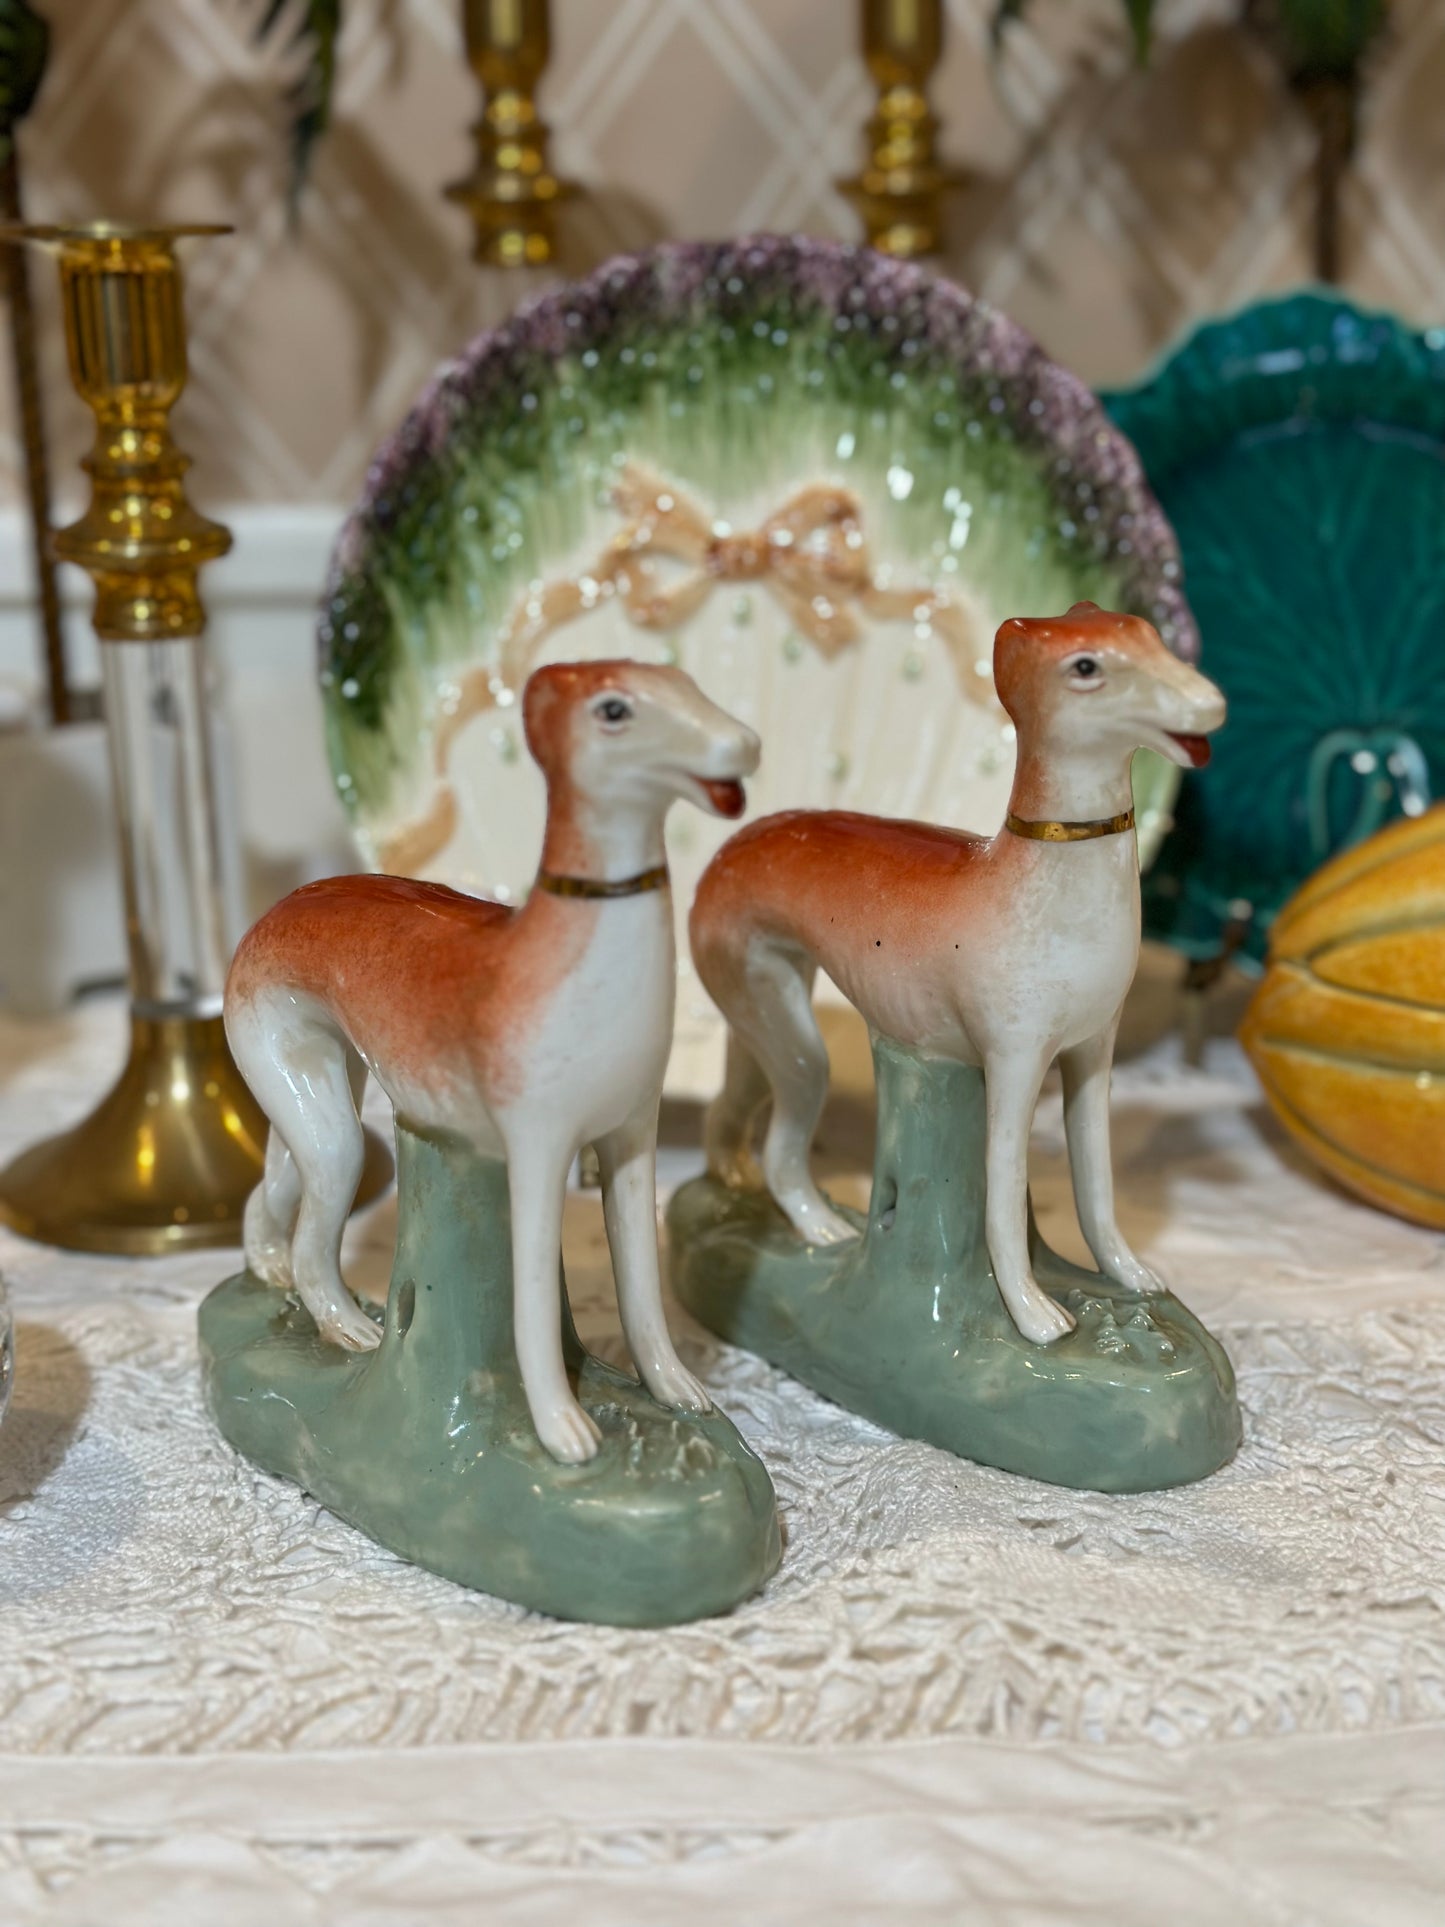 Reproduction Pair (2) Whippet dog figures, 7x6” - excellent!